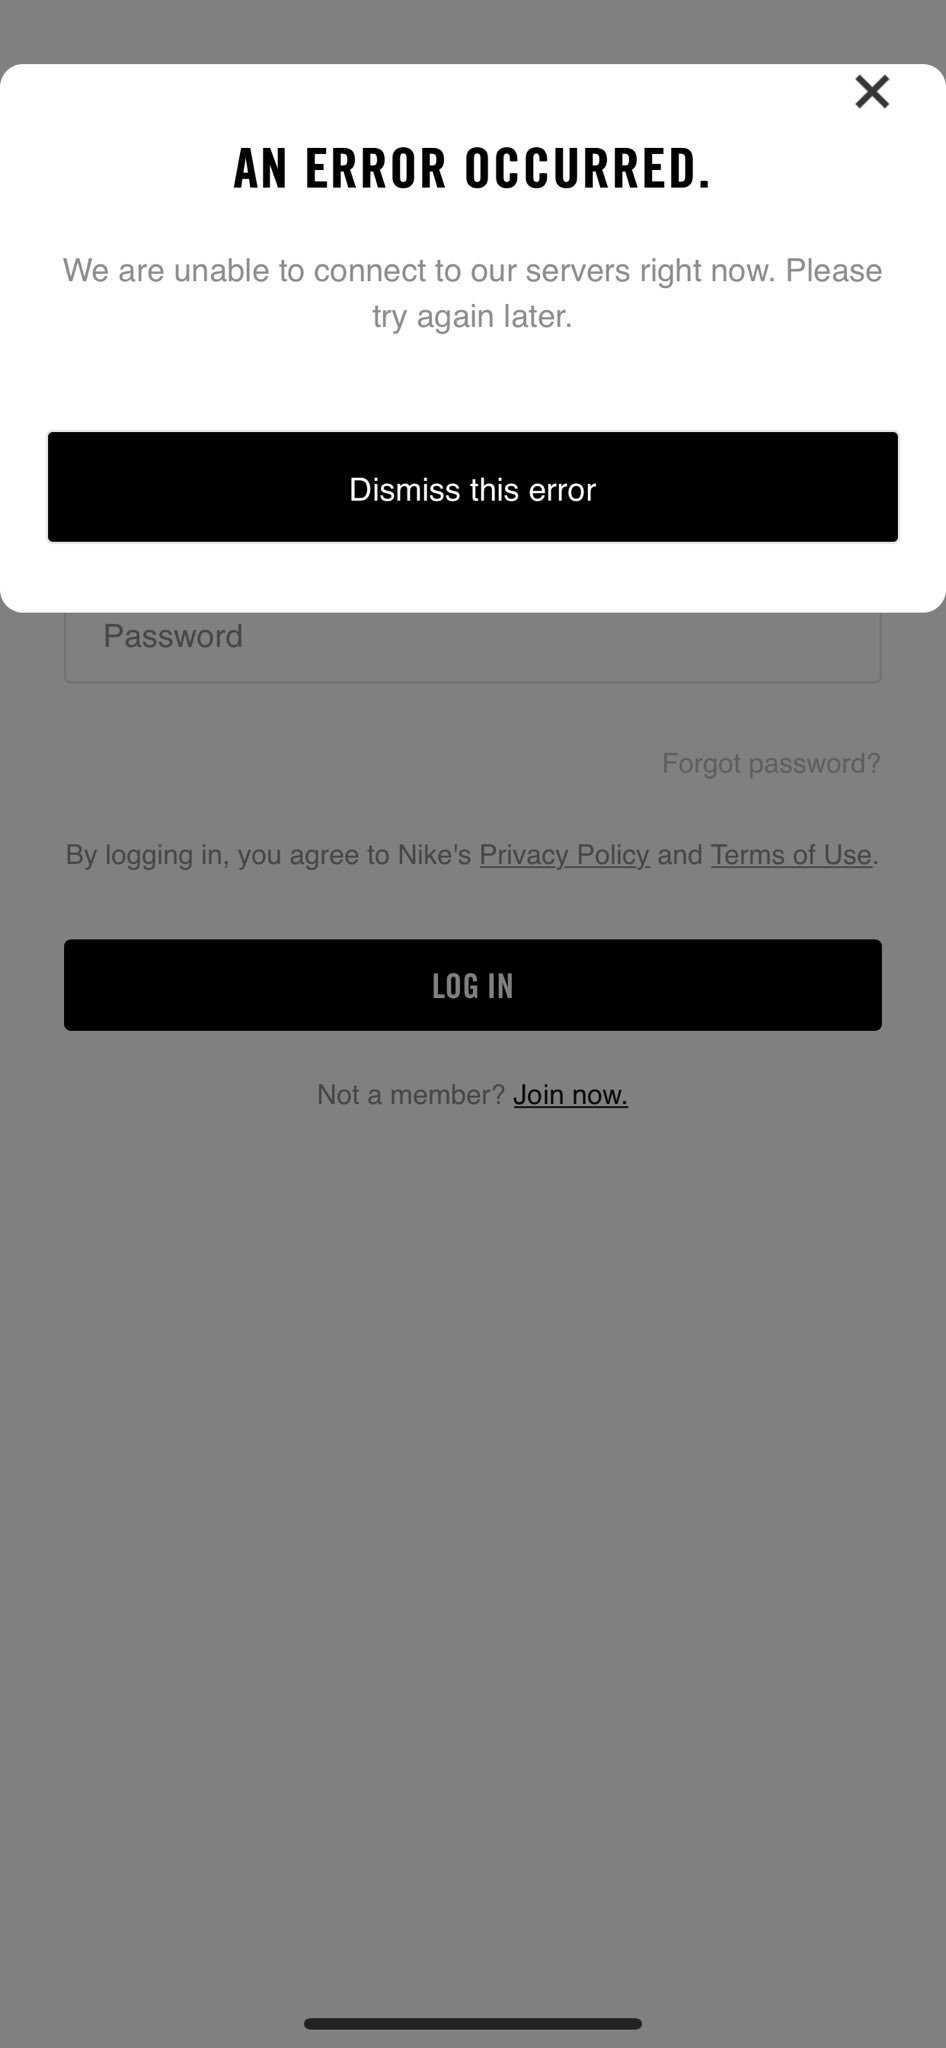 klif Beraadslagen munt Nike.com on Twitter: "@bootygaper If you're have trouble on the SNKRS App,  you can enter The Draw using the desktop SNKRS site here:  https://t.co/tfm37cwg28" / Twitter